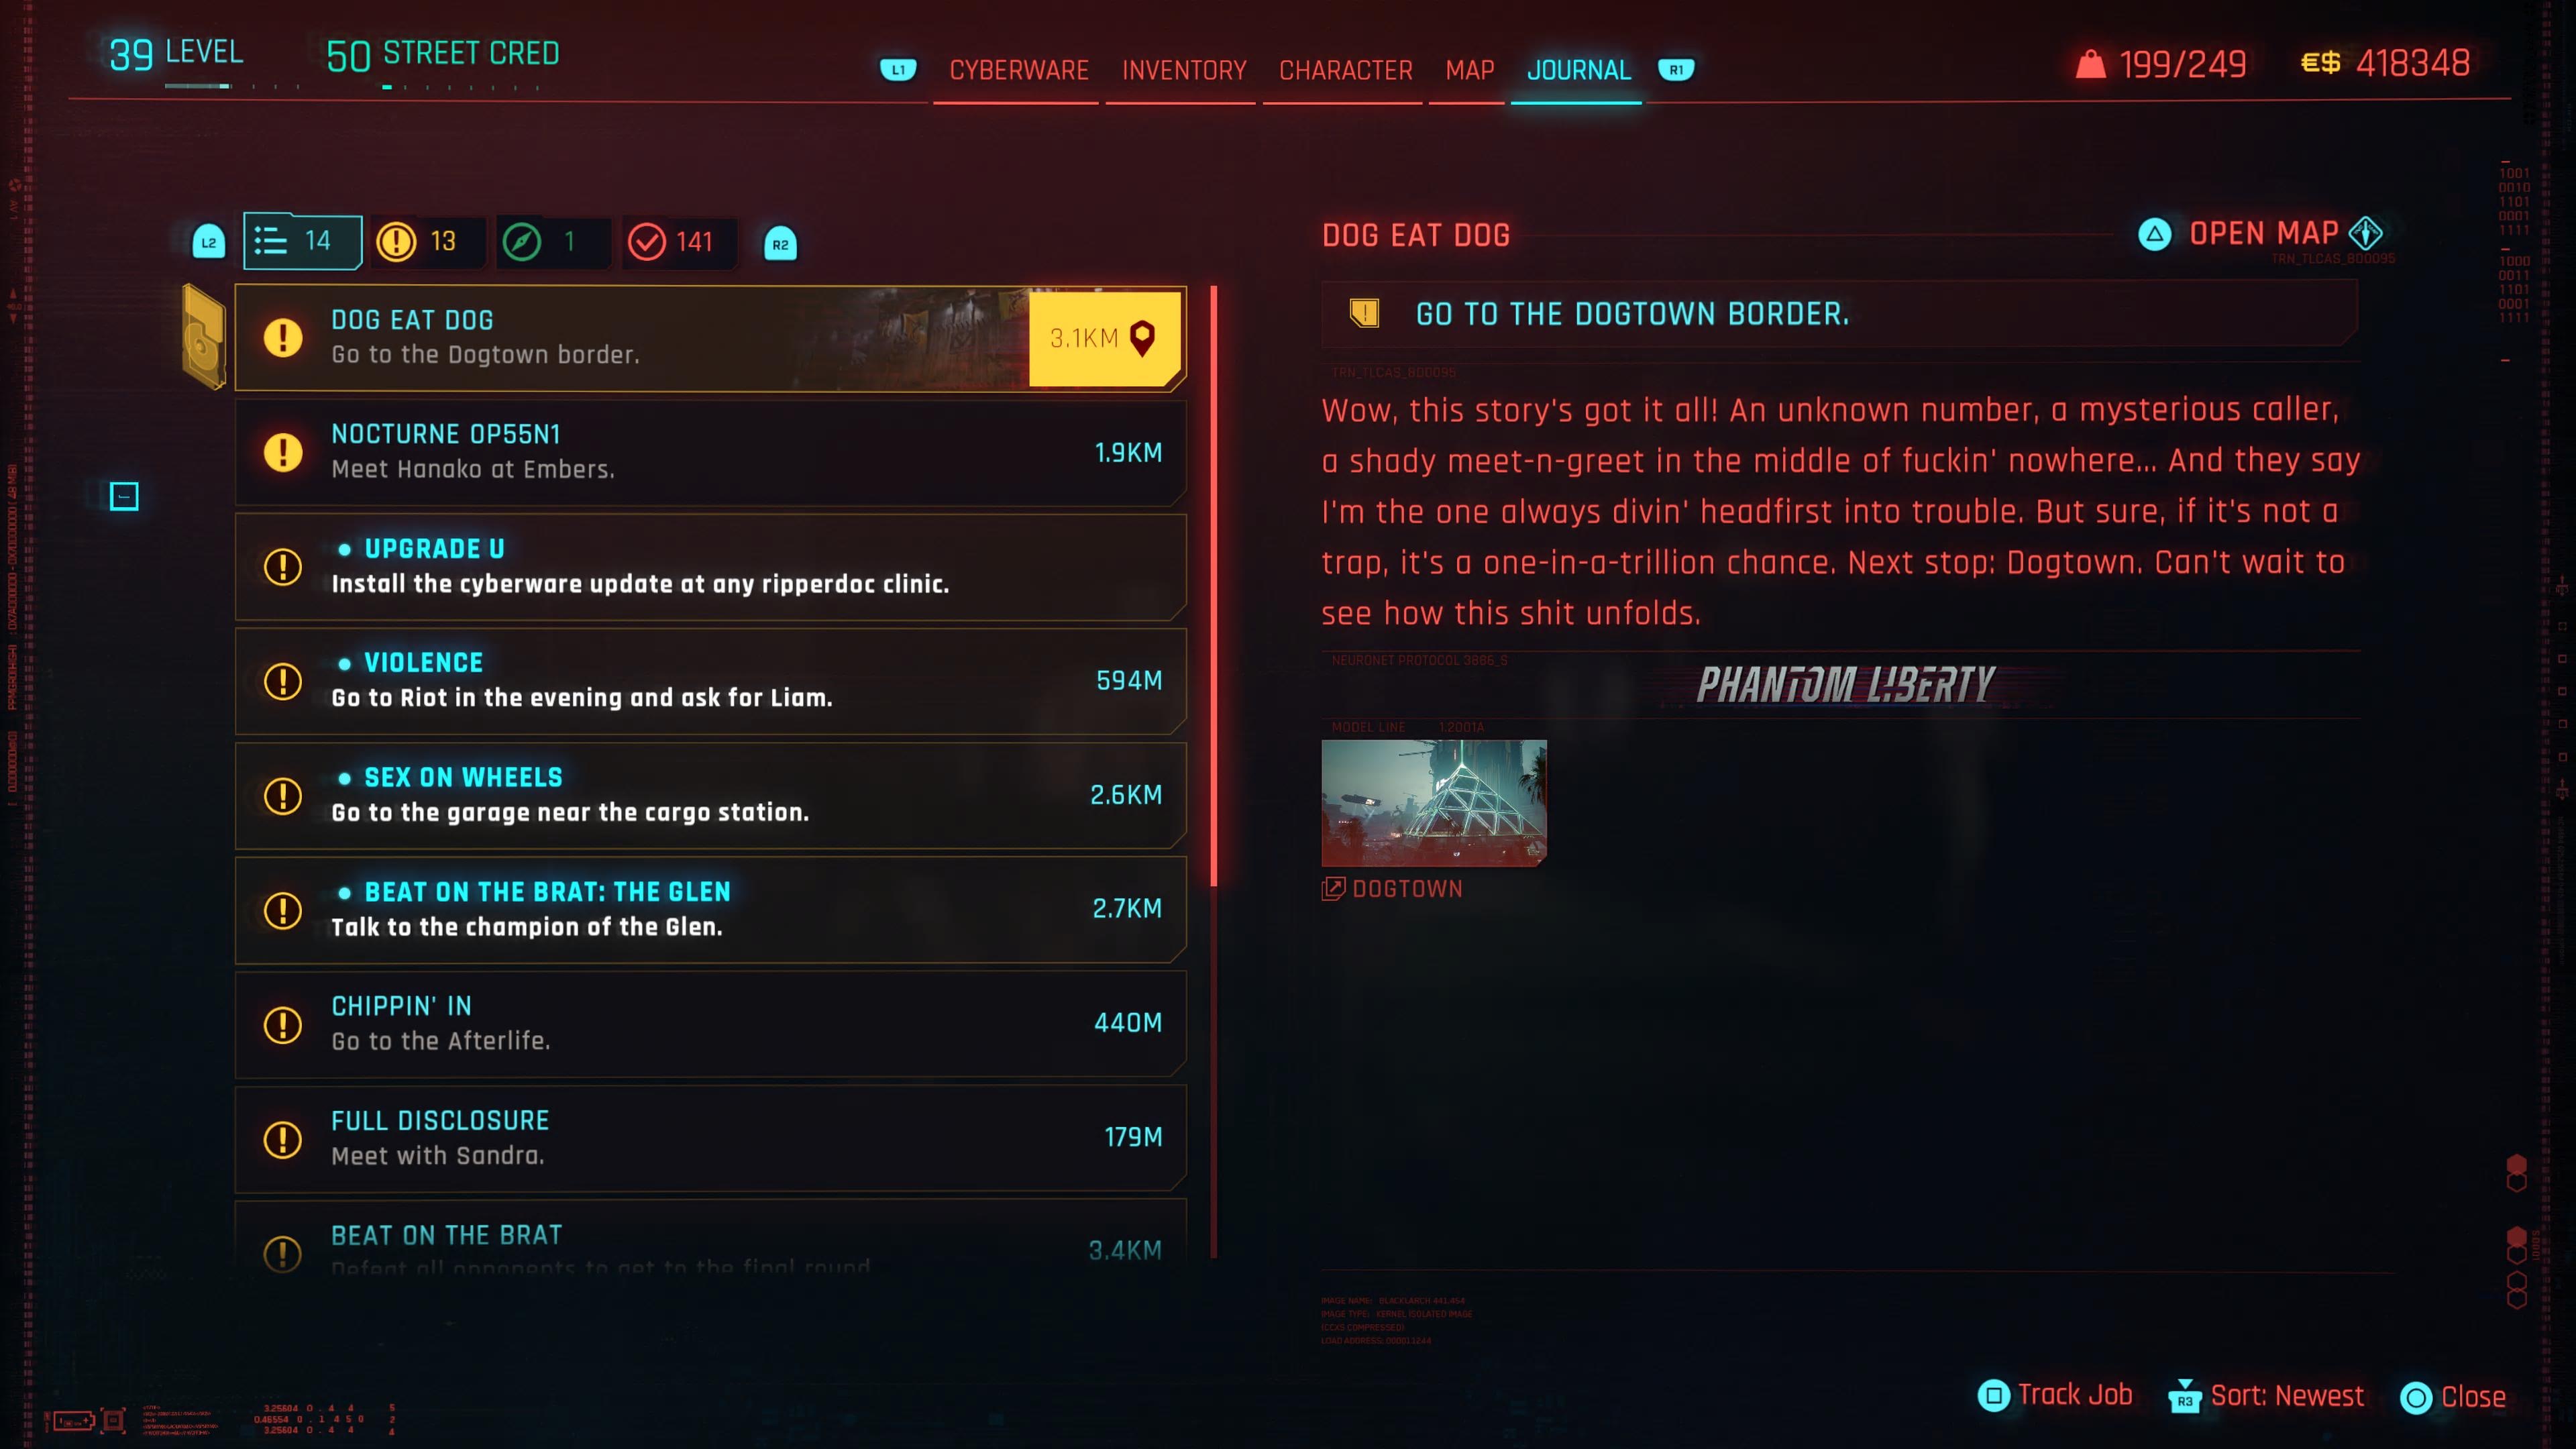 An in game screenshot of the mission menu from the game Cyberpunk 2077. 